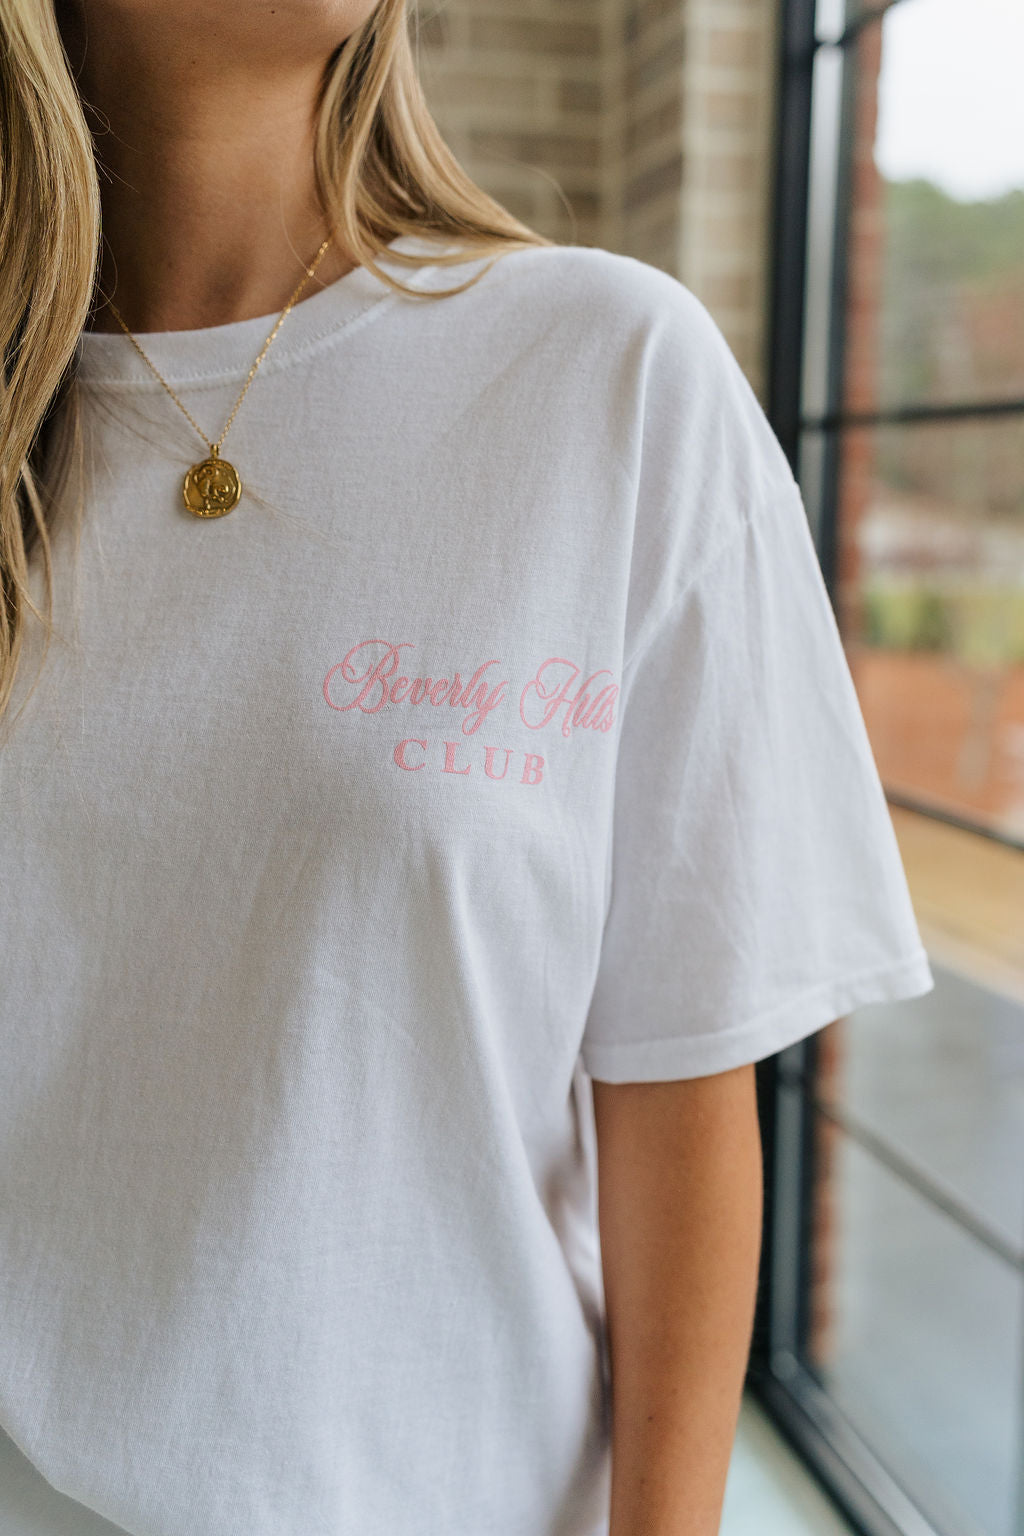 Close up view of female model wearing the Beverly Hills Tennis Club Graphic Tee which features White Cotton Fabric, Round Neckline , Short Sleeves, Beverly Hills Tennis Club in pink and green writing.